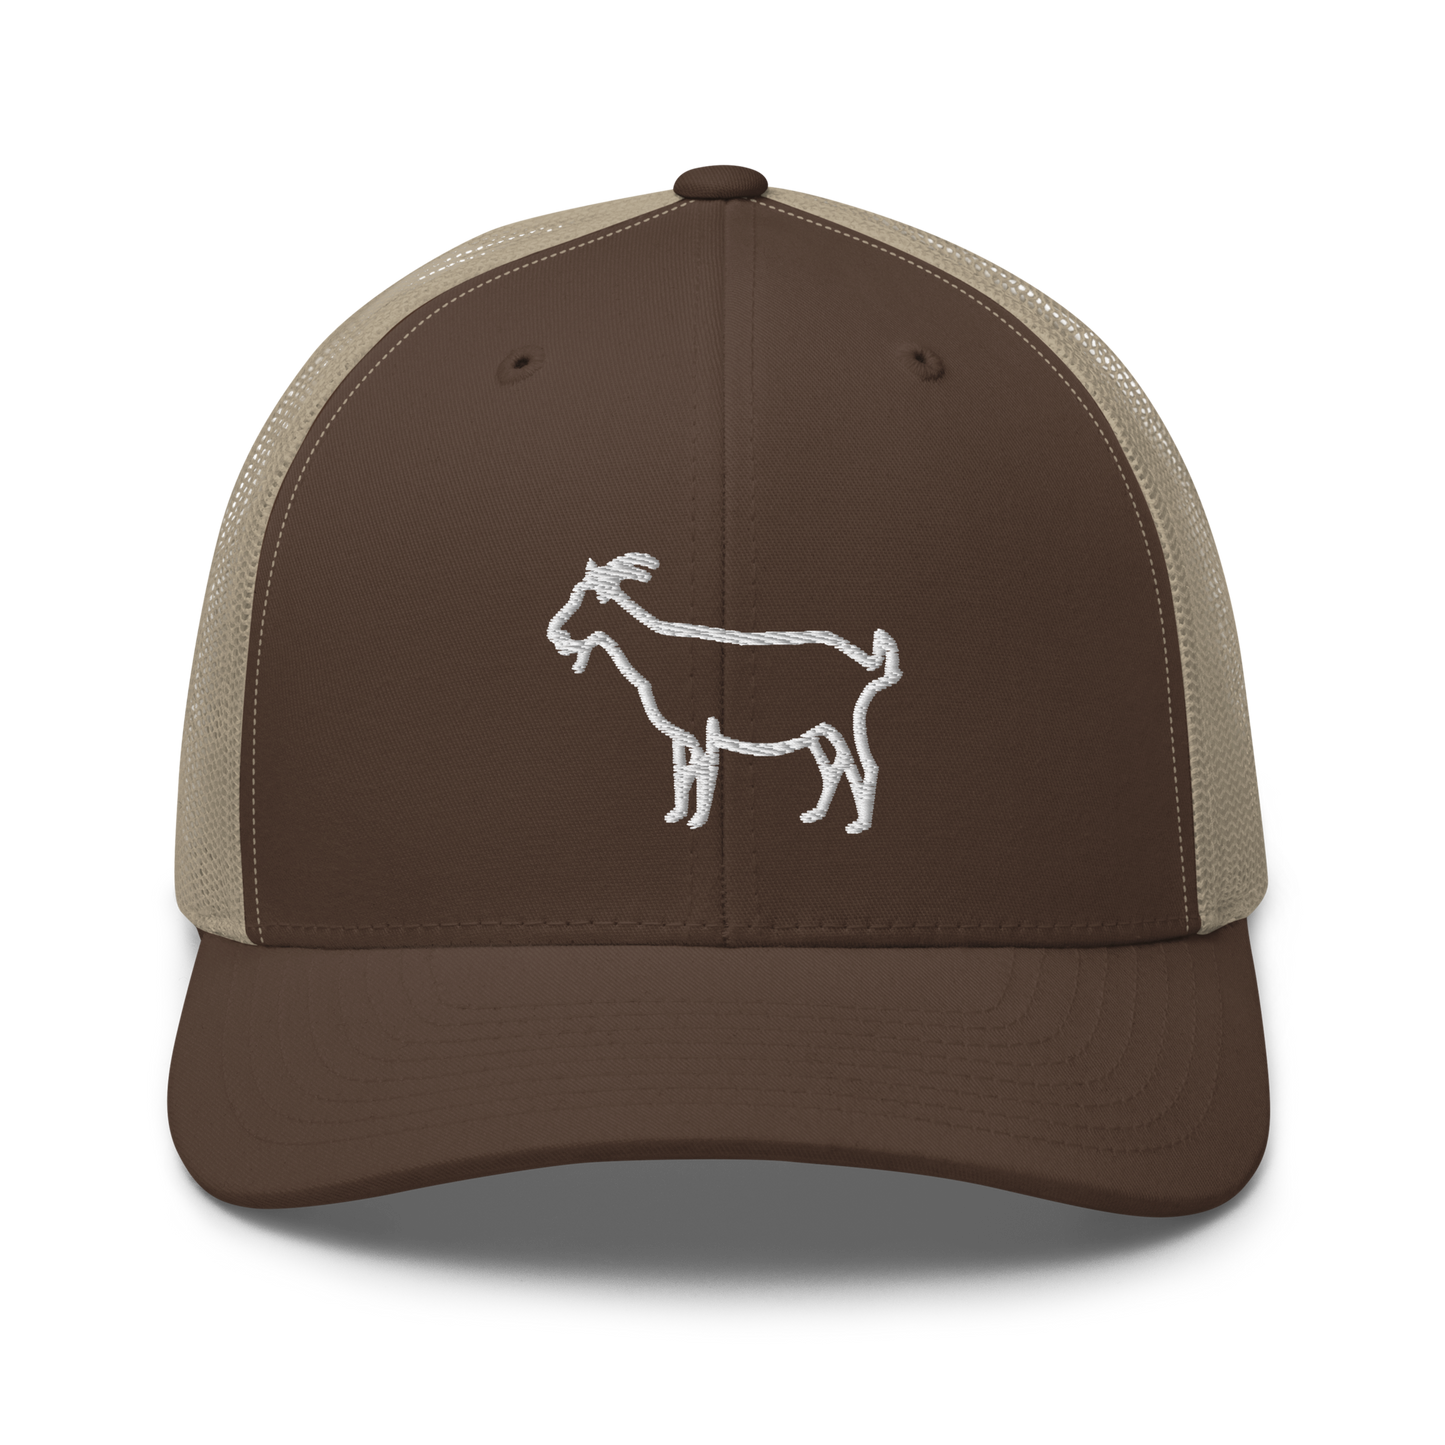 The Goat Trucker Cap | Flat Embroidery | Inspired BMFS Art